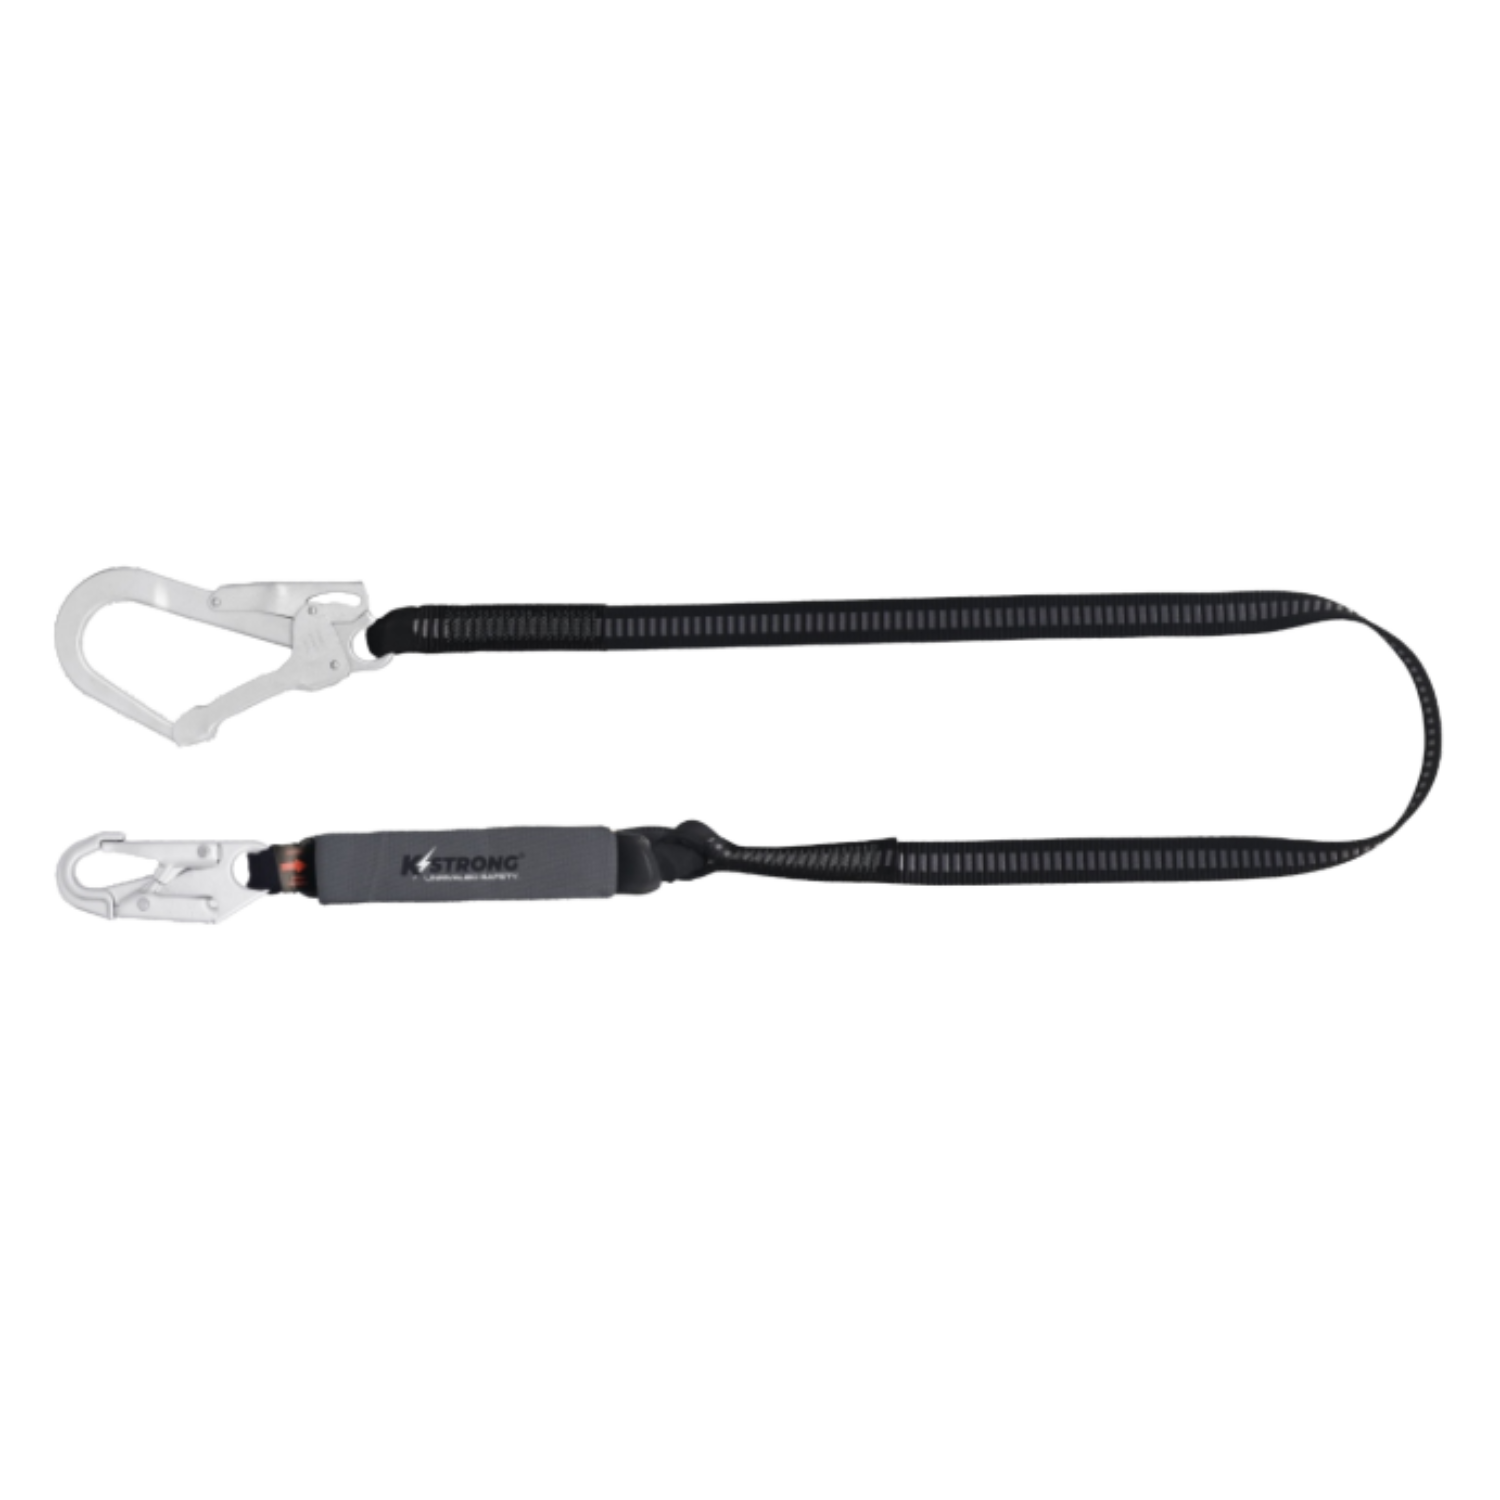 Epic Shock Absorbing Lanyard with Steel Snap and Steel Forged Snap